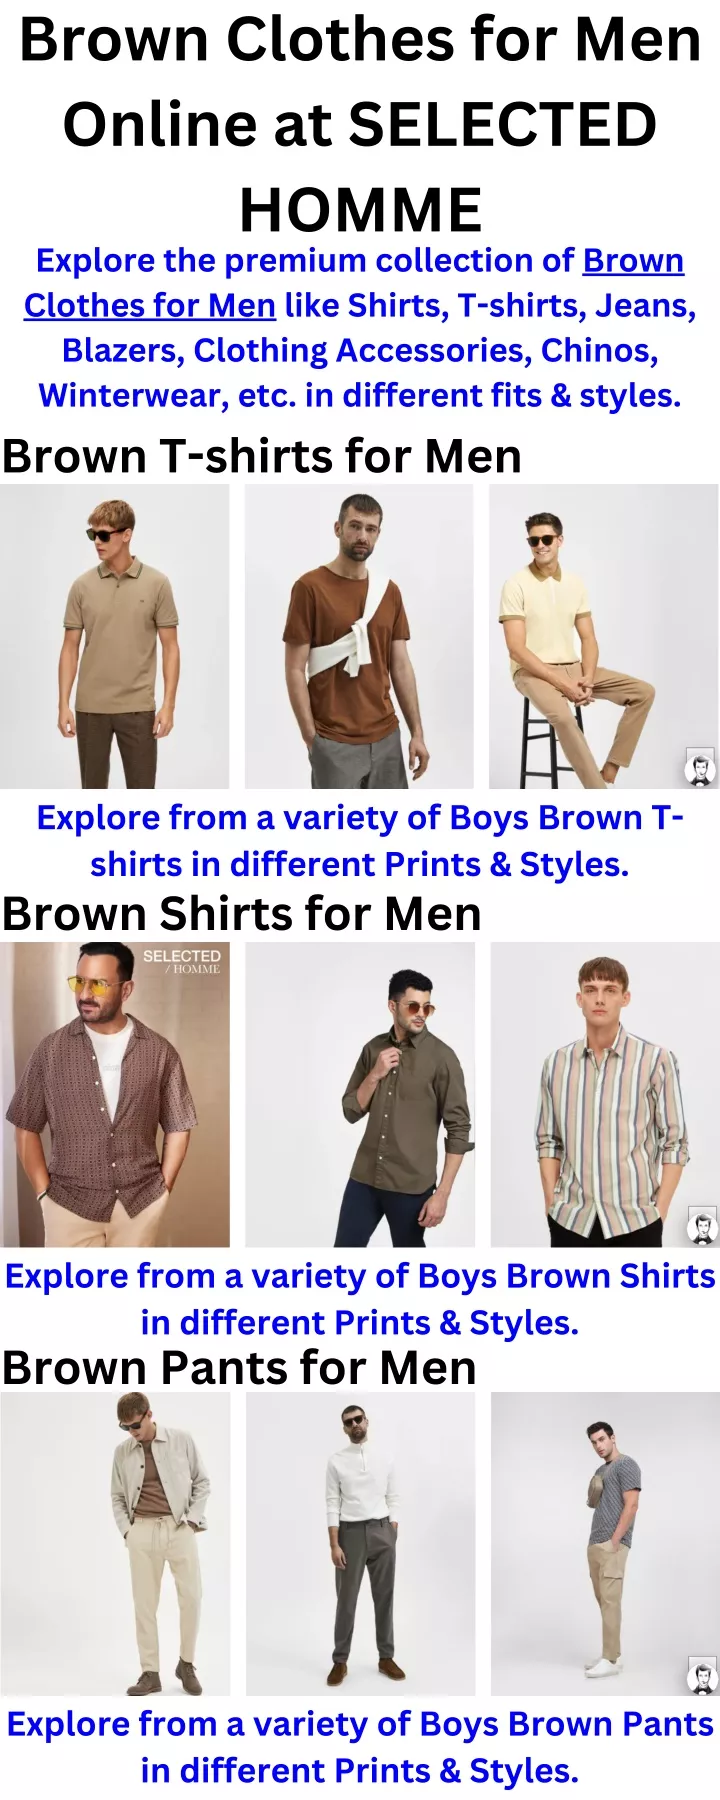 brown clothes for men online at selected homme